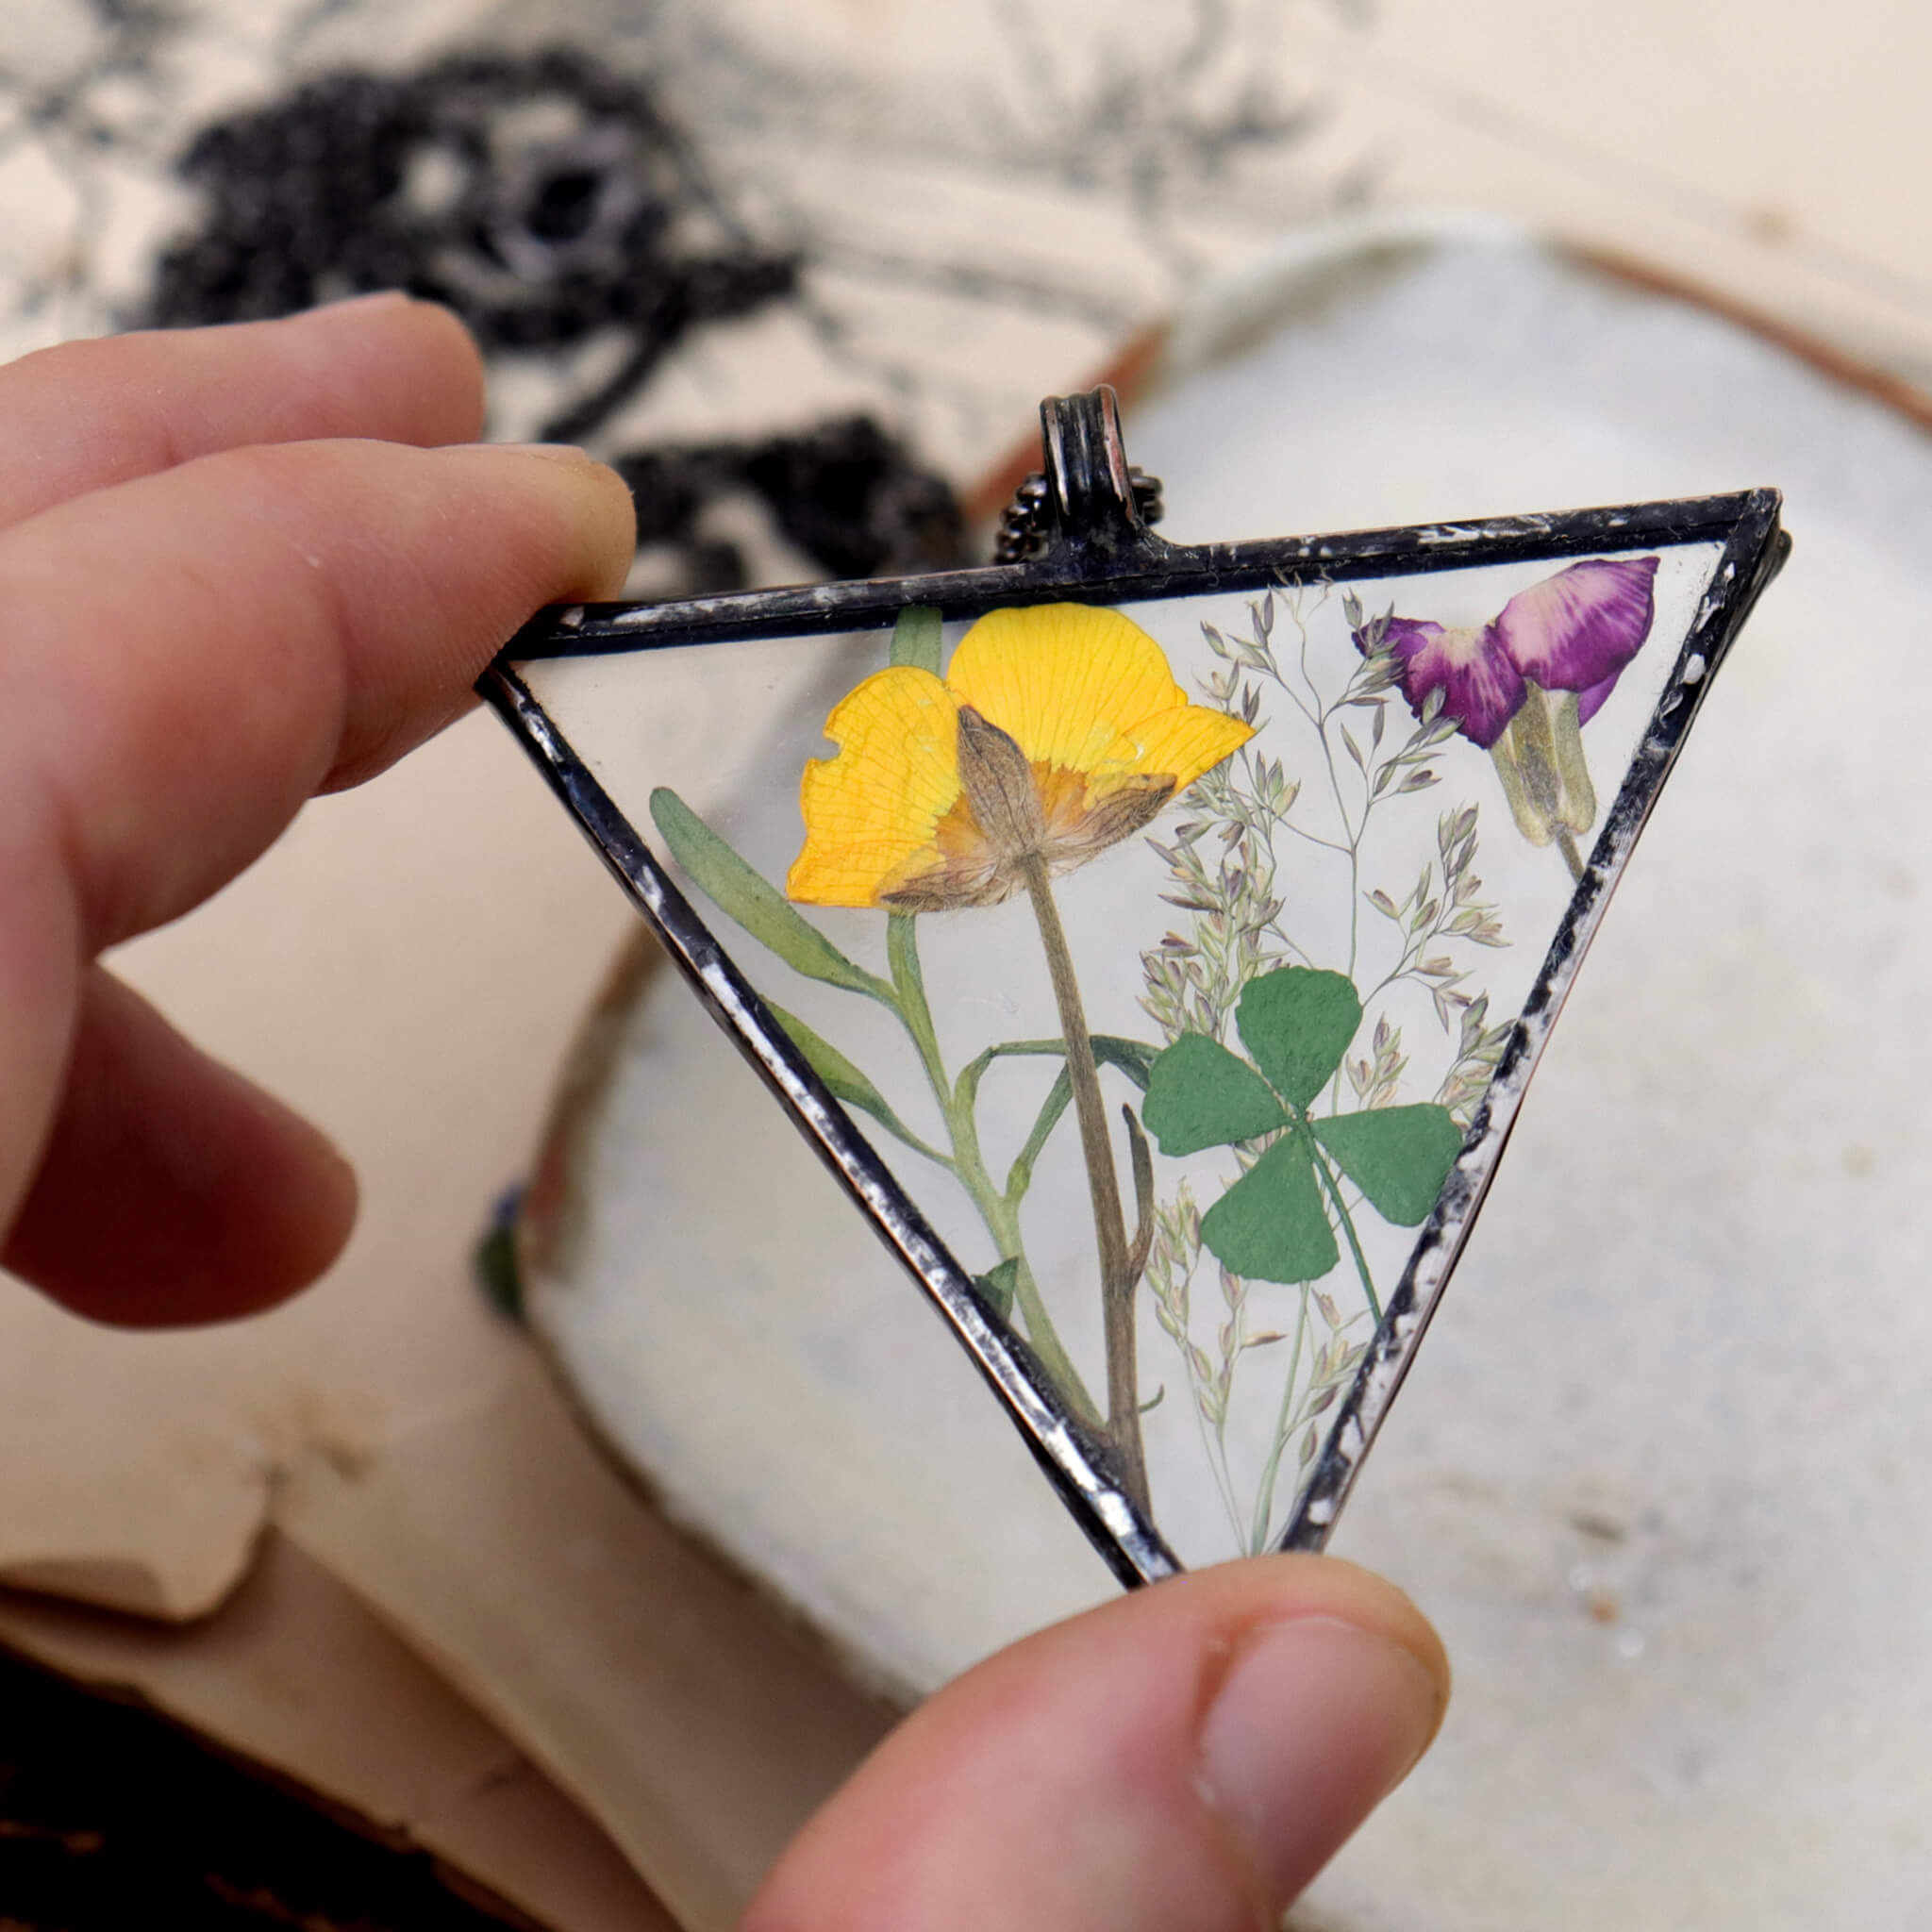 Hand holding Triangular yellow and green pressed flowers necklace